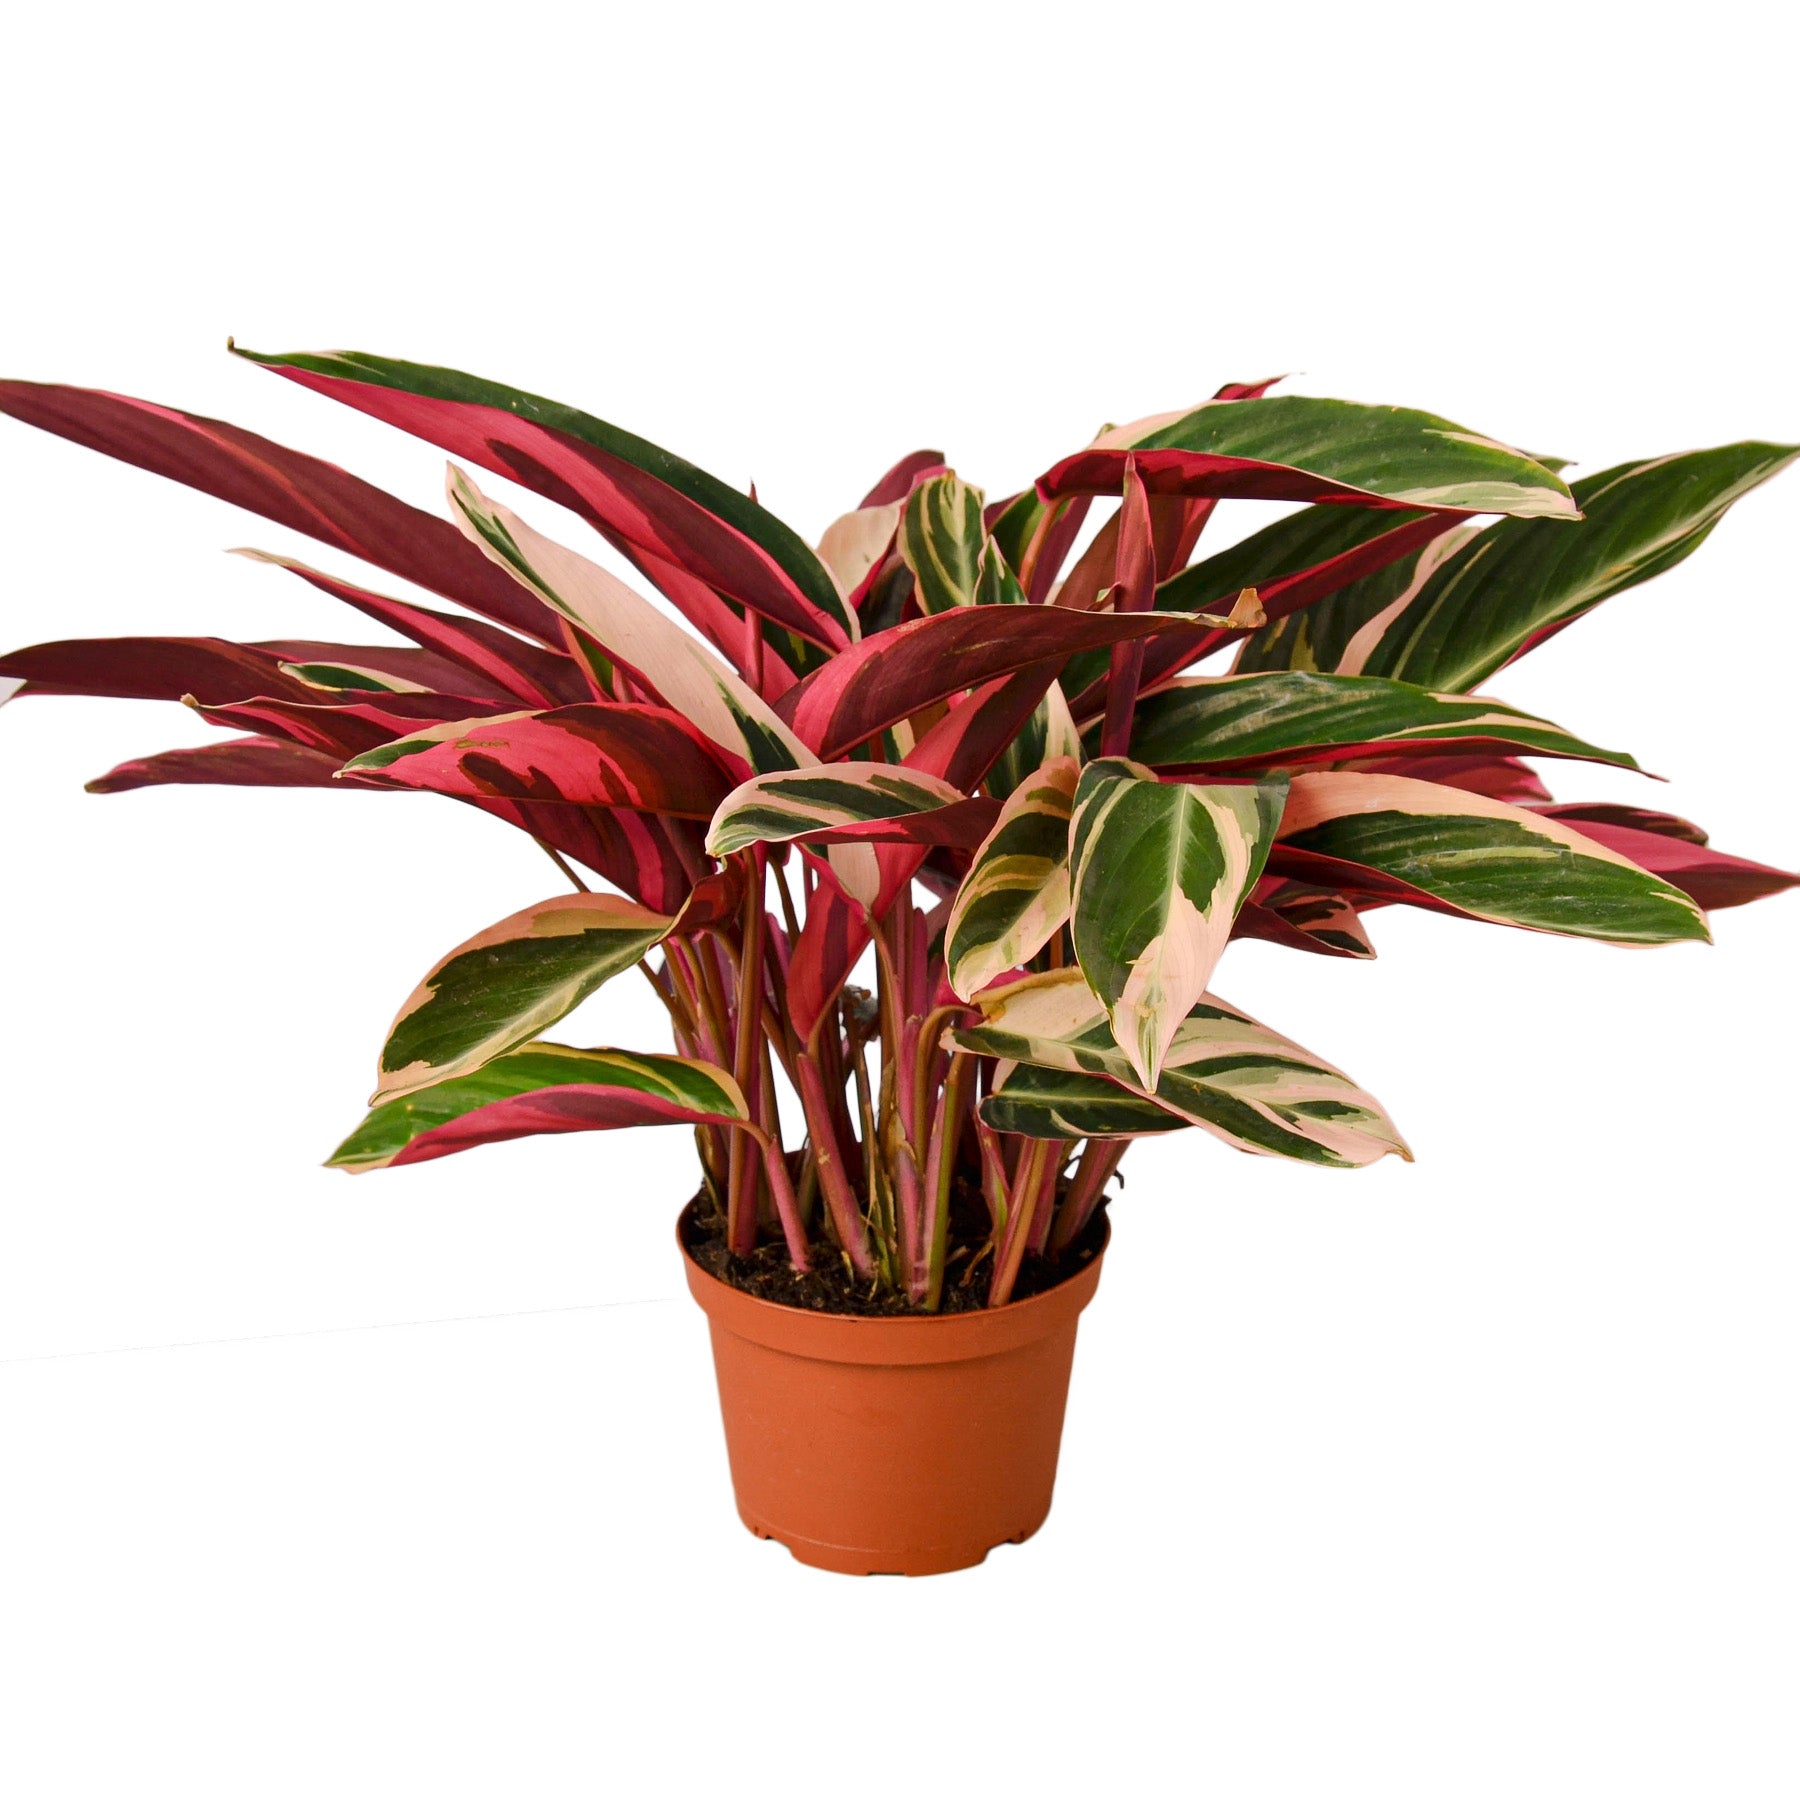 A red and green plant in a pot.